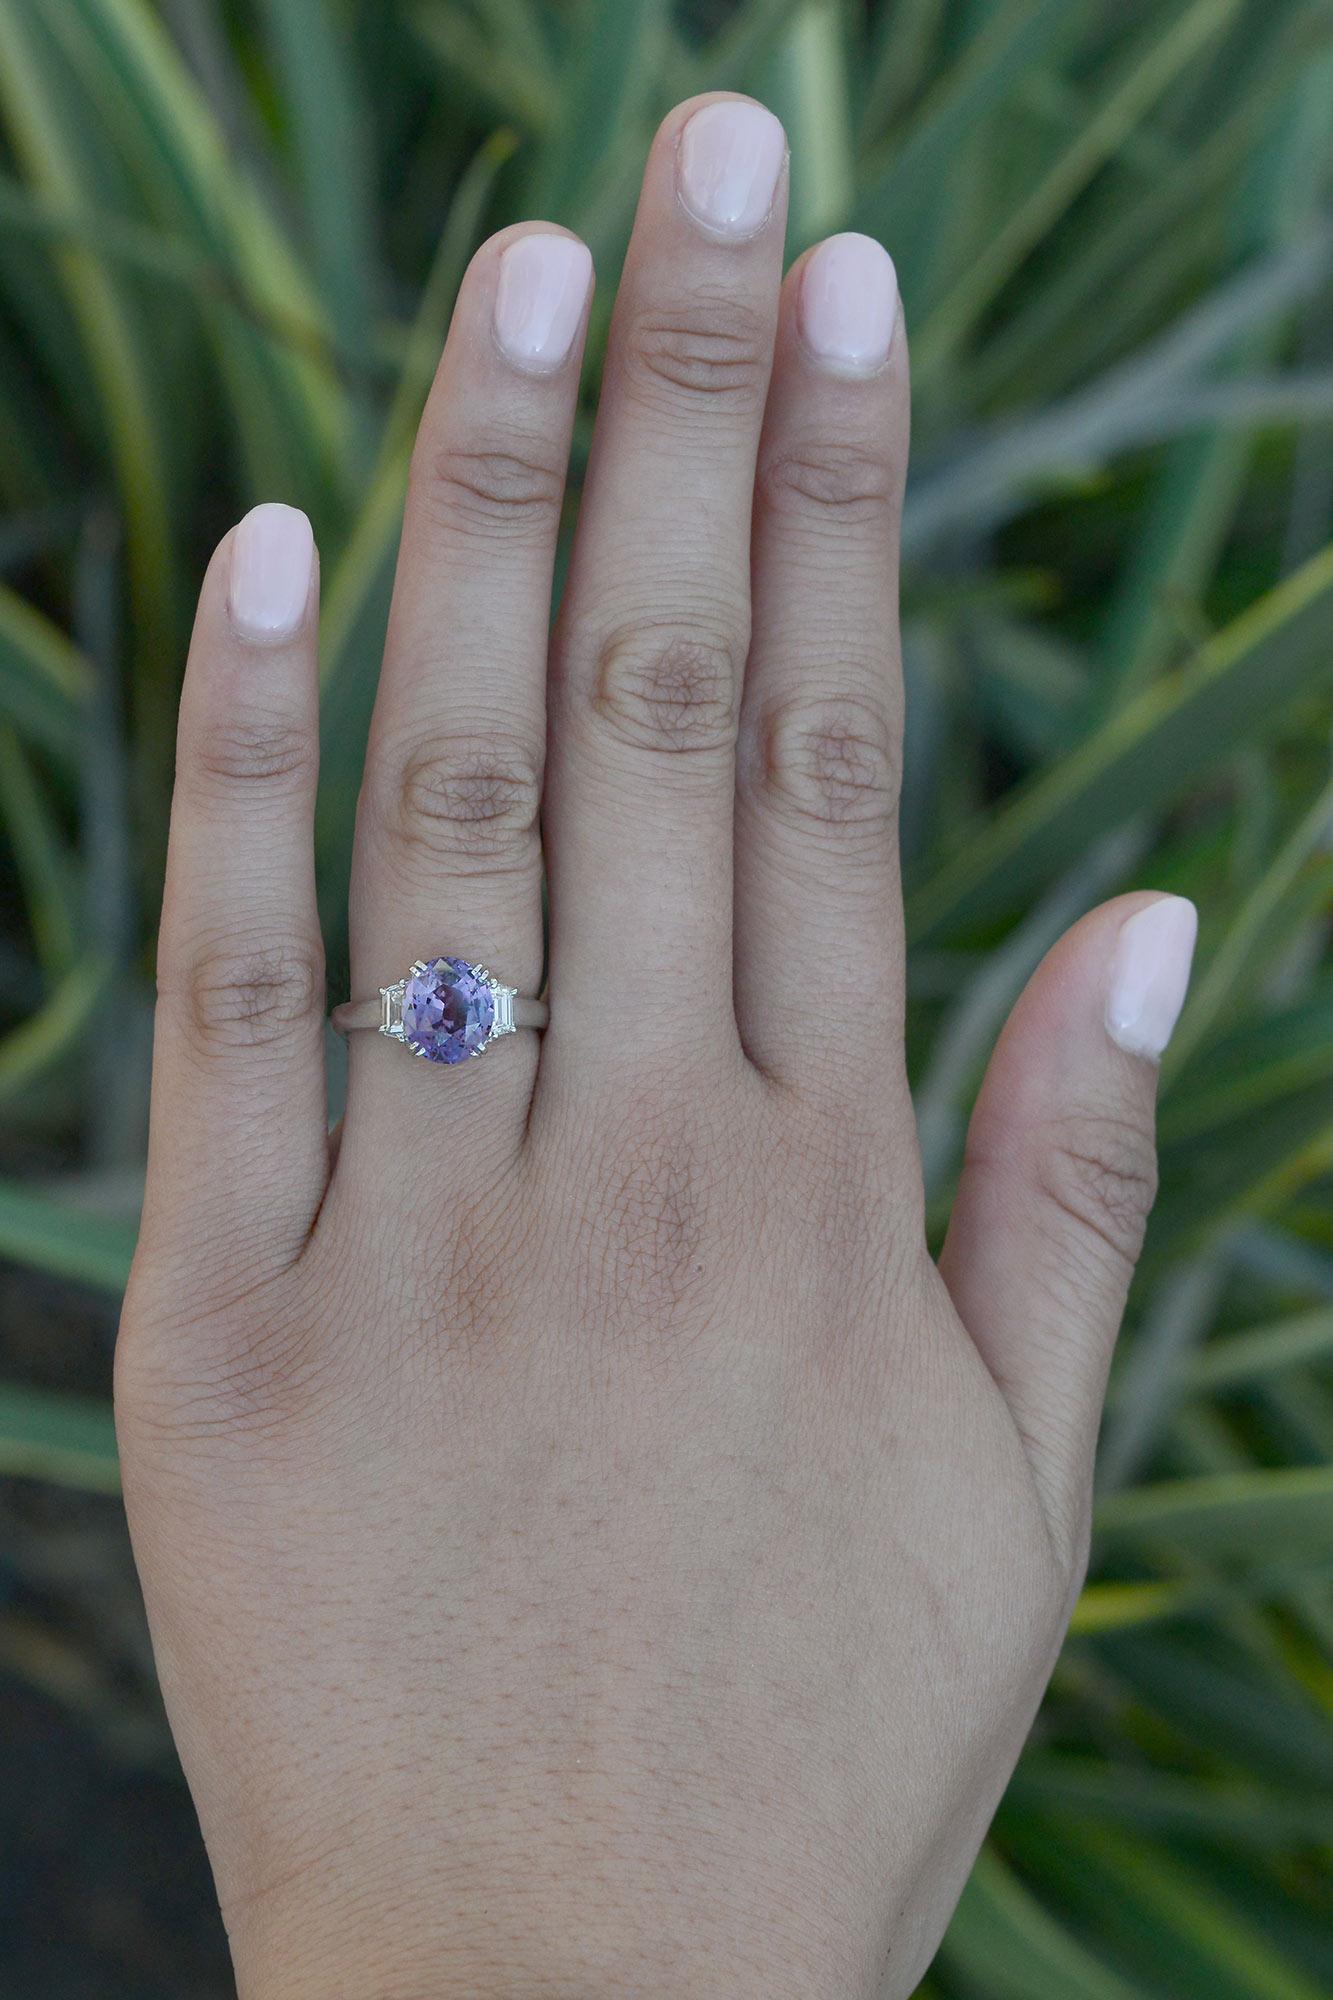 A passionately beautiful purple sapphire engagement ring in an elegant 3 stone setting. Taking center stage is a 3.23 carat captivating, brilliant and lively natural sapphire of a shimmering shade of pinkish lavender with a fabulous luster. The